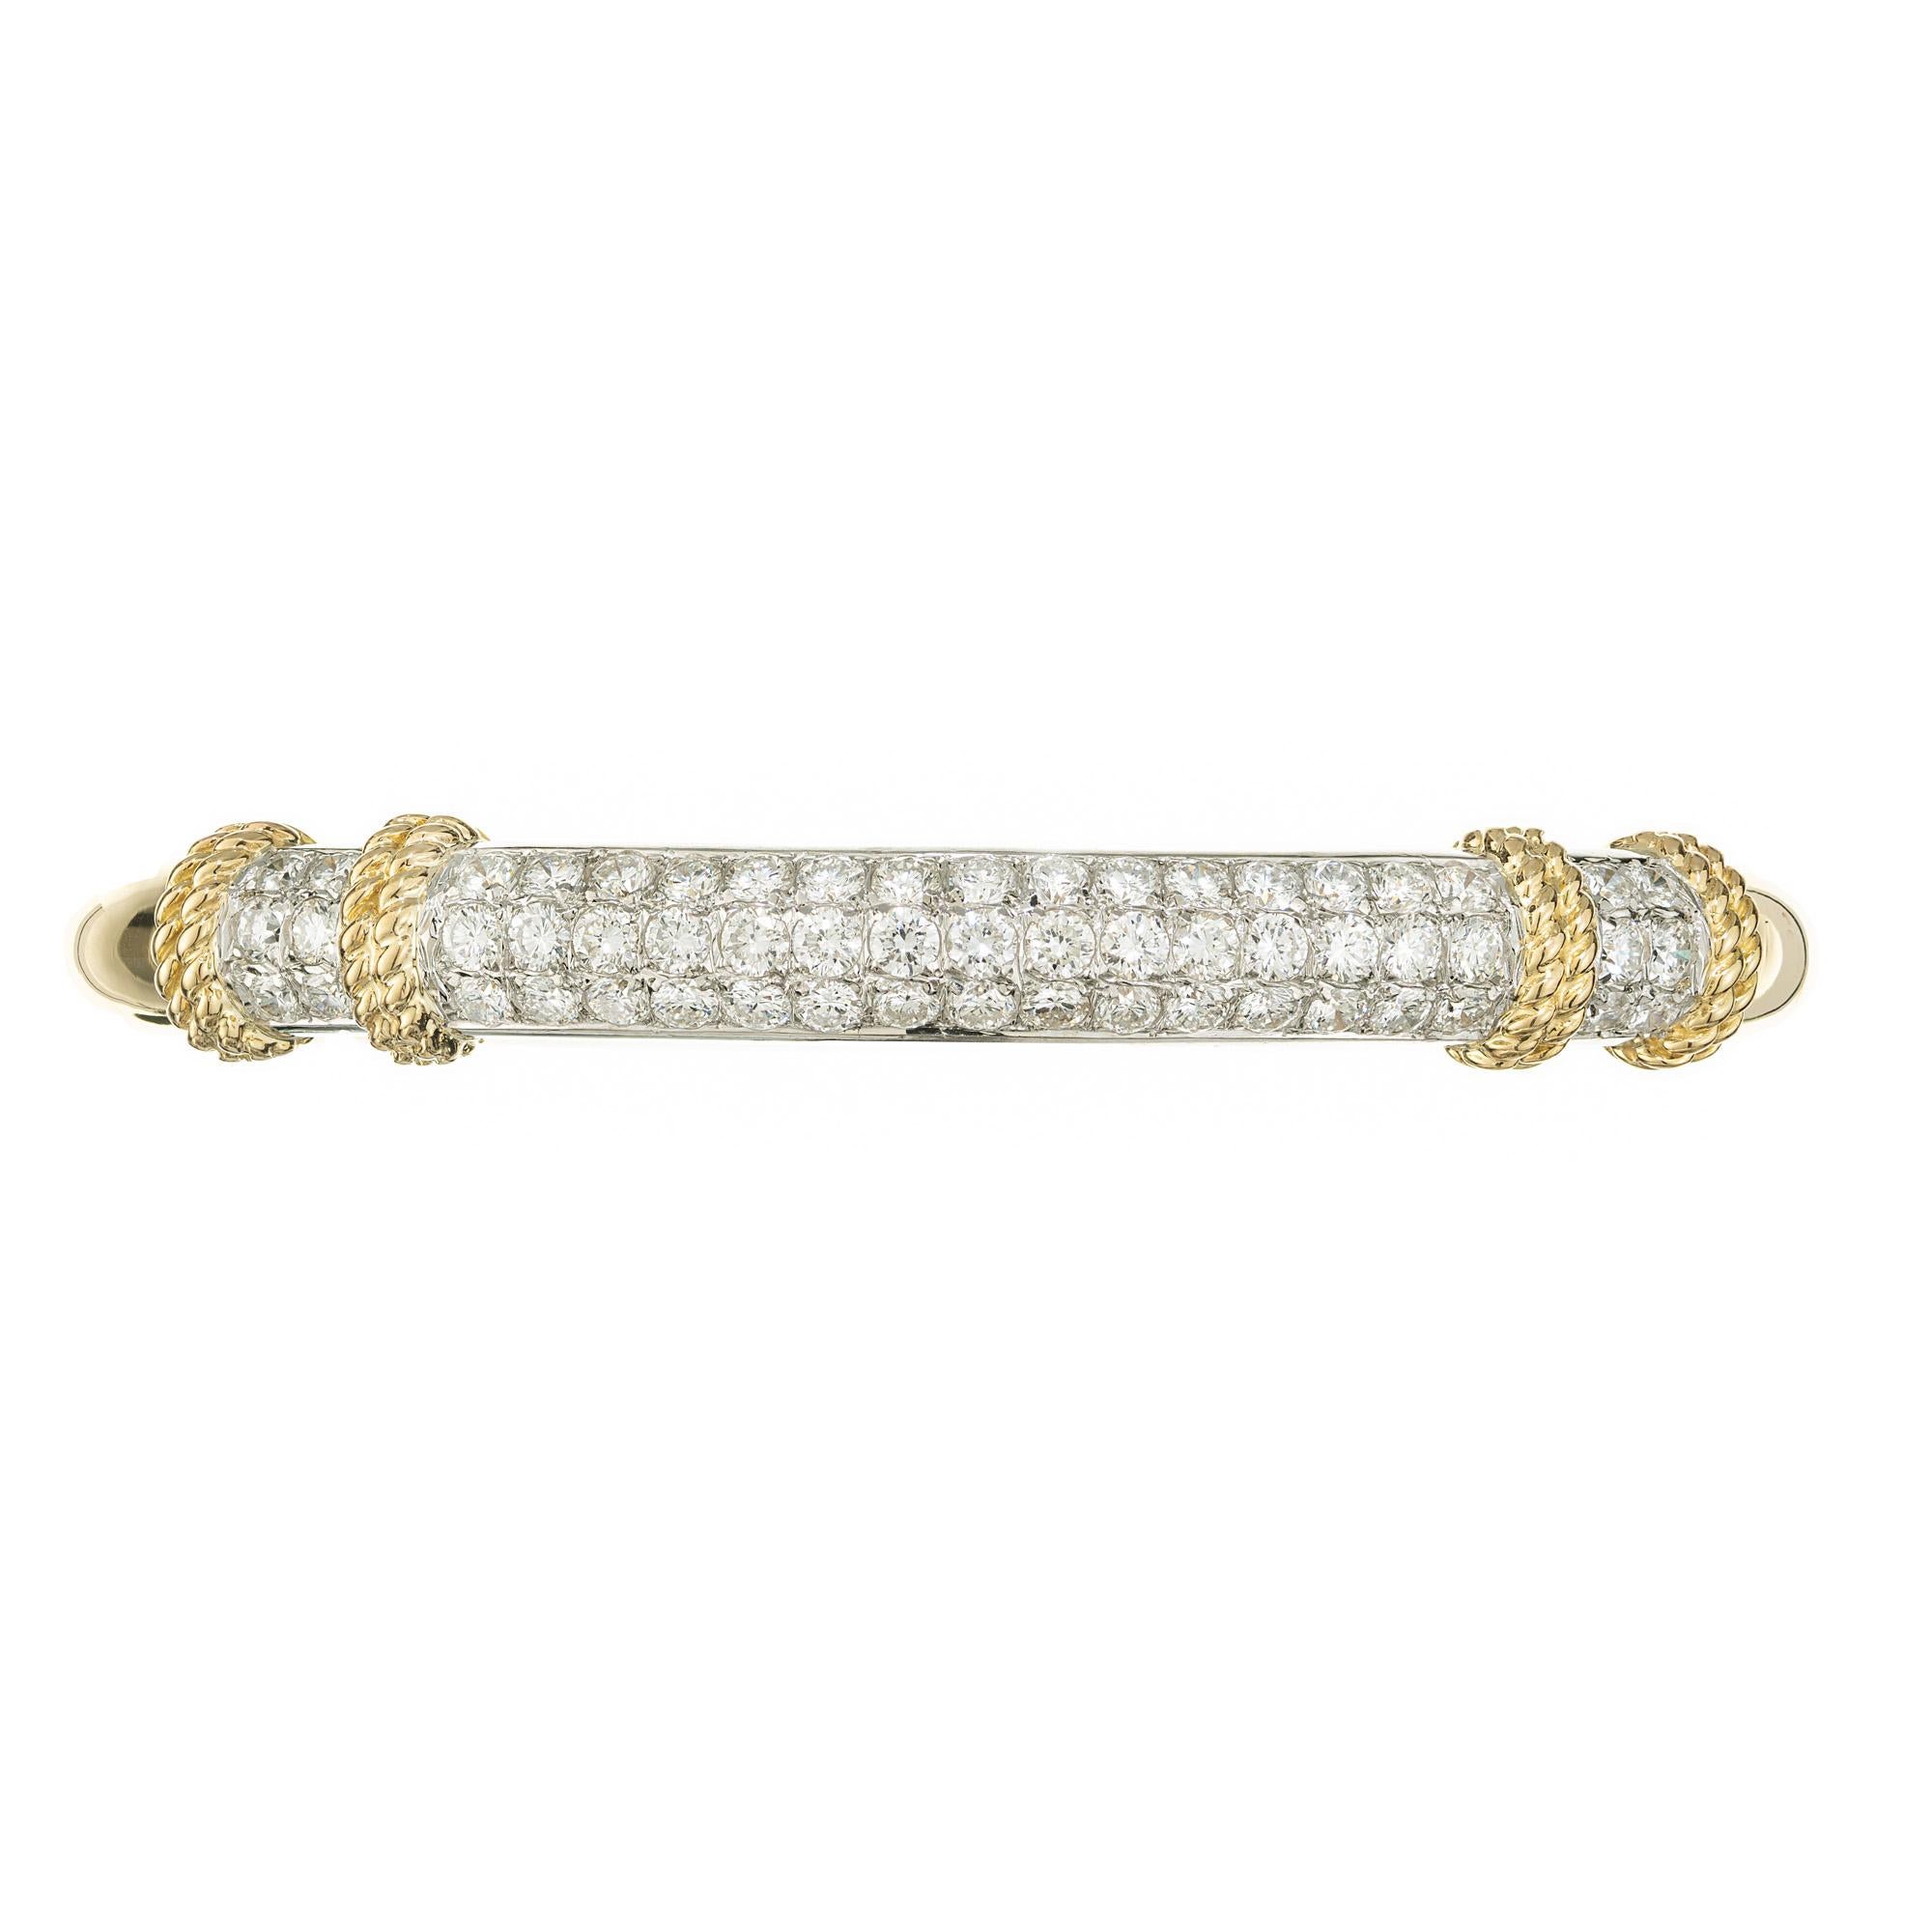 Vintage 1970's Fred of Paris France diamond bangle bracelet. 57 round brilliant cut diamonds aligned in 3 rows framed with 18k white gold and 18k yellow gold twisted wire accents. The rest of this dazzling bangle is made in 18k yellow gold.

57